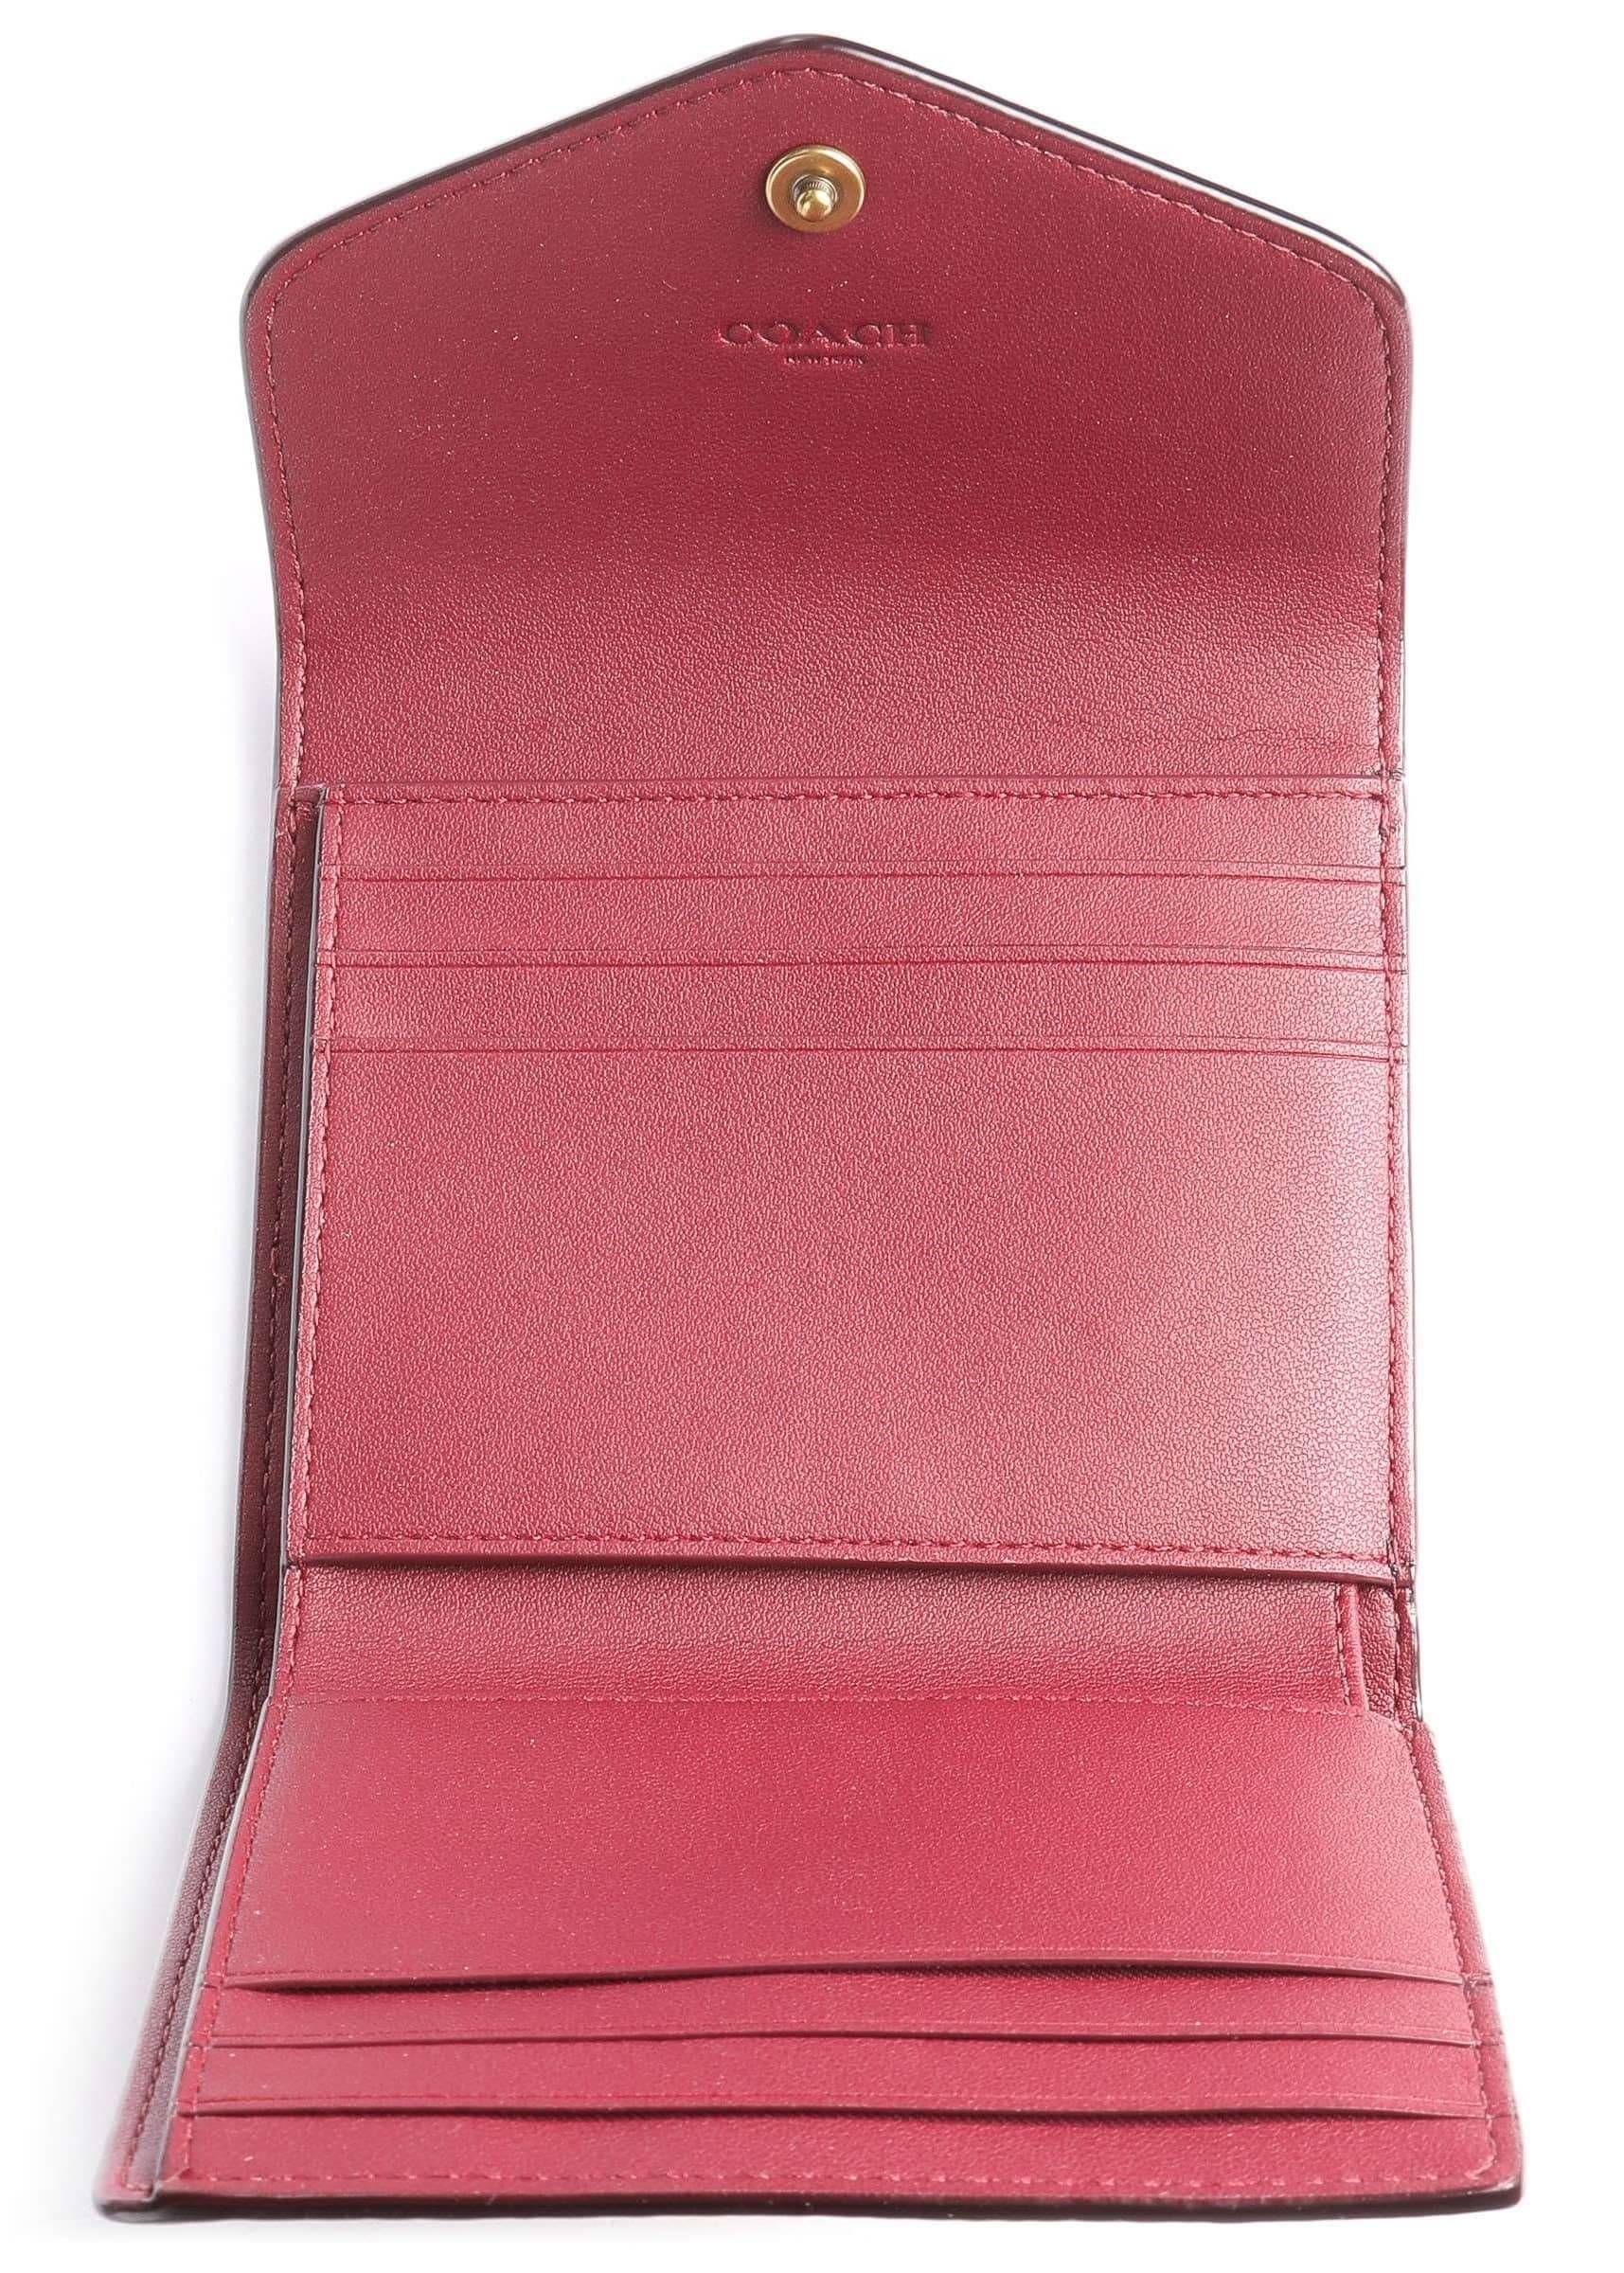 VÍ NGẮN NỮ GẬP COACH WYN SMALL WALLET IN COLORBLOCK SIGNATURE CANVAS 2